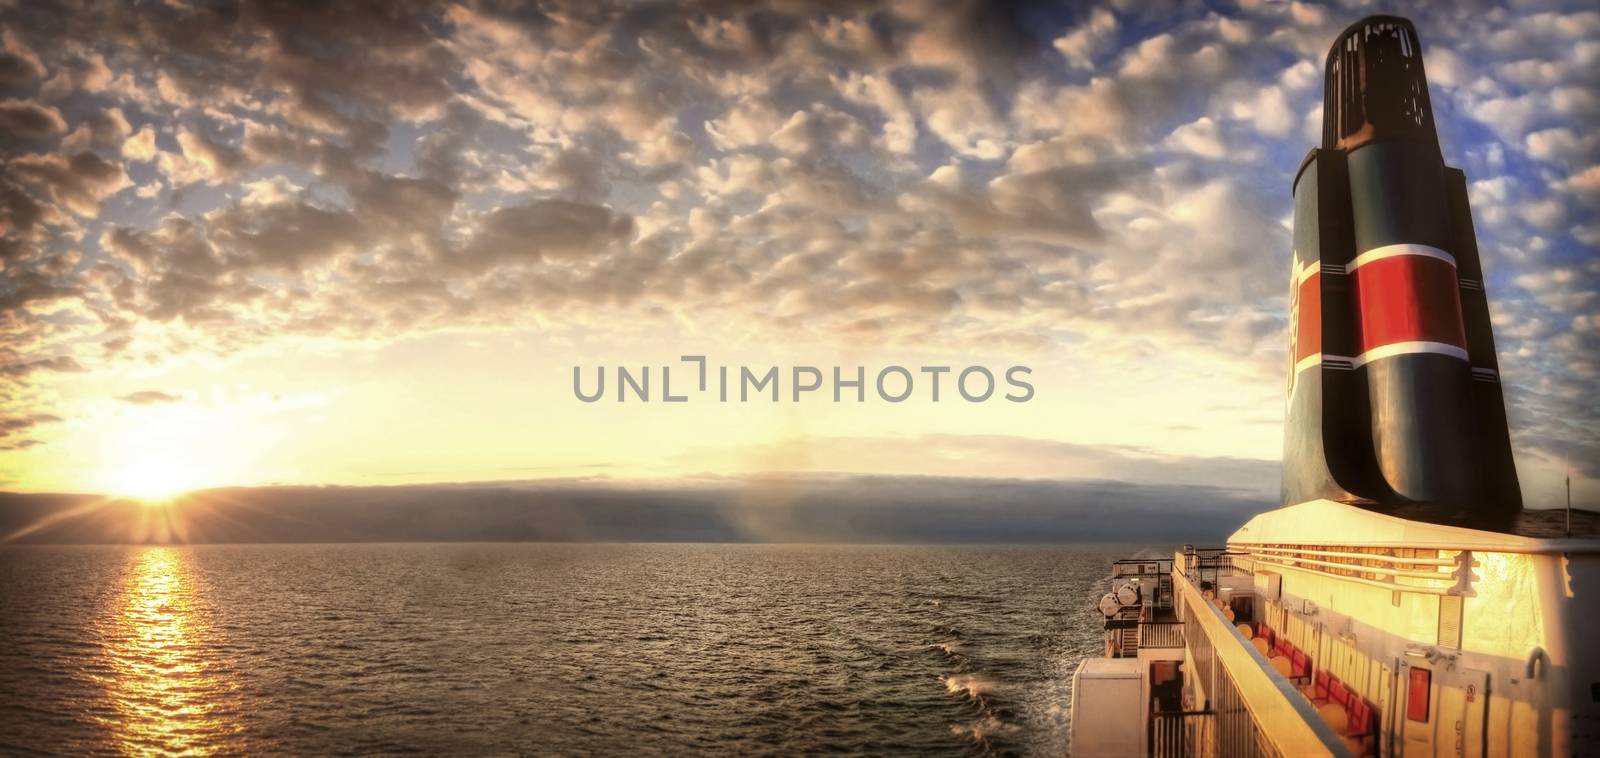 Travel conceptual image. Sunset over the sea visible from the ferry.